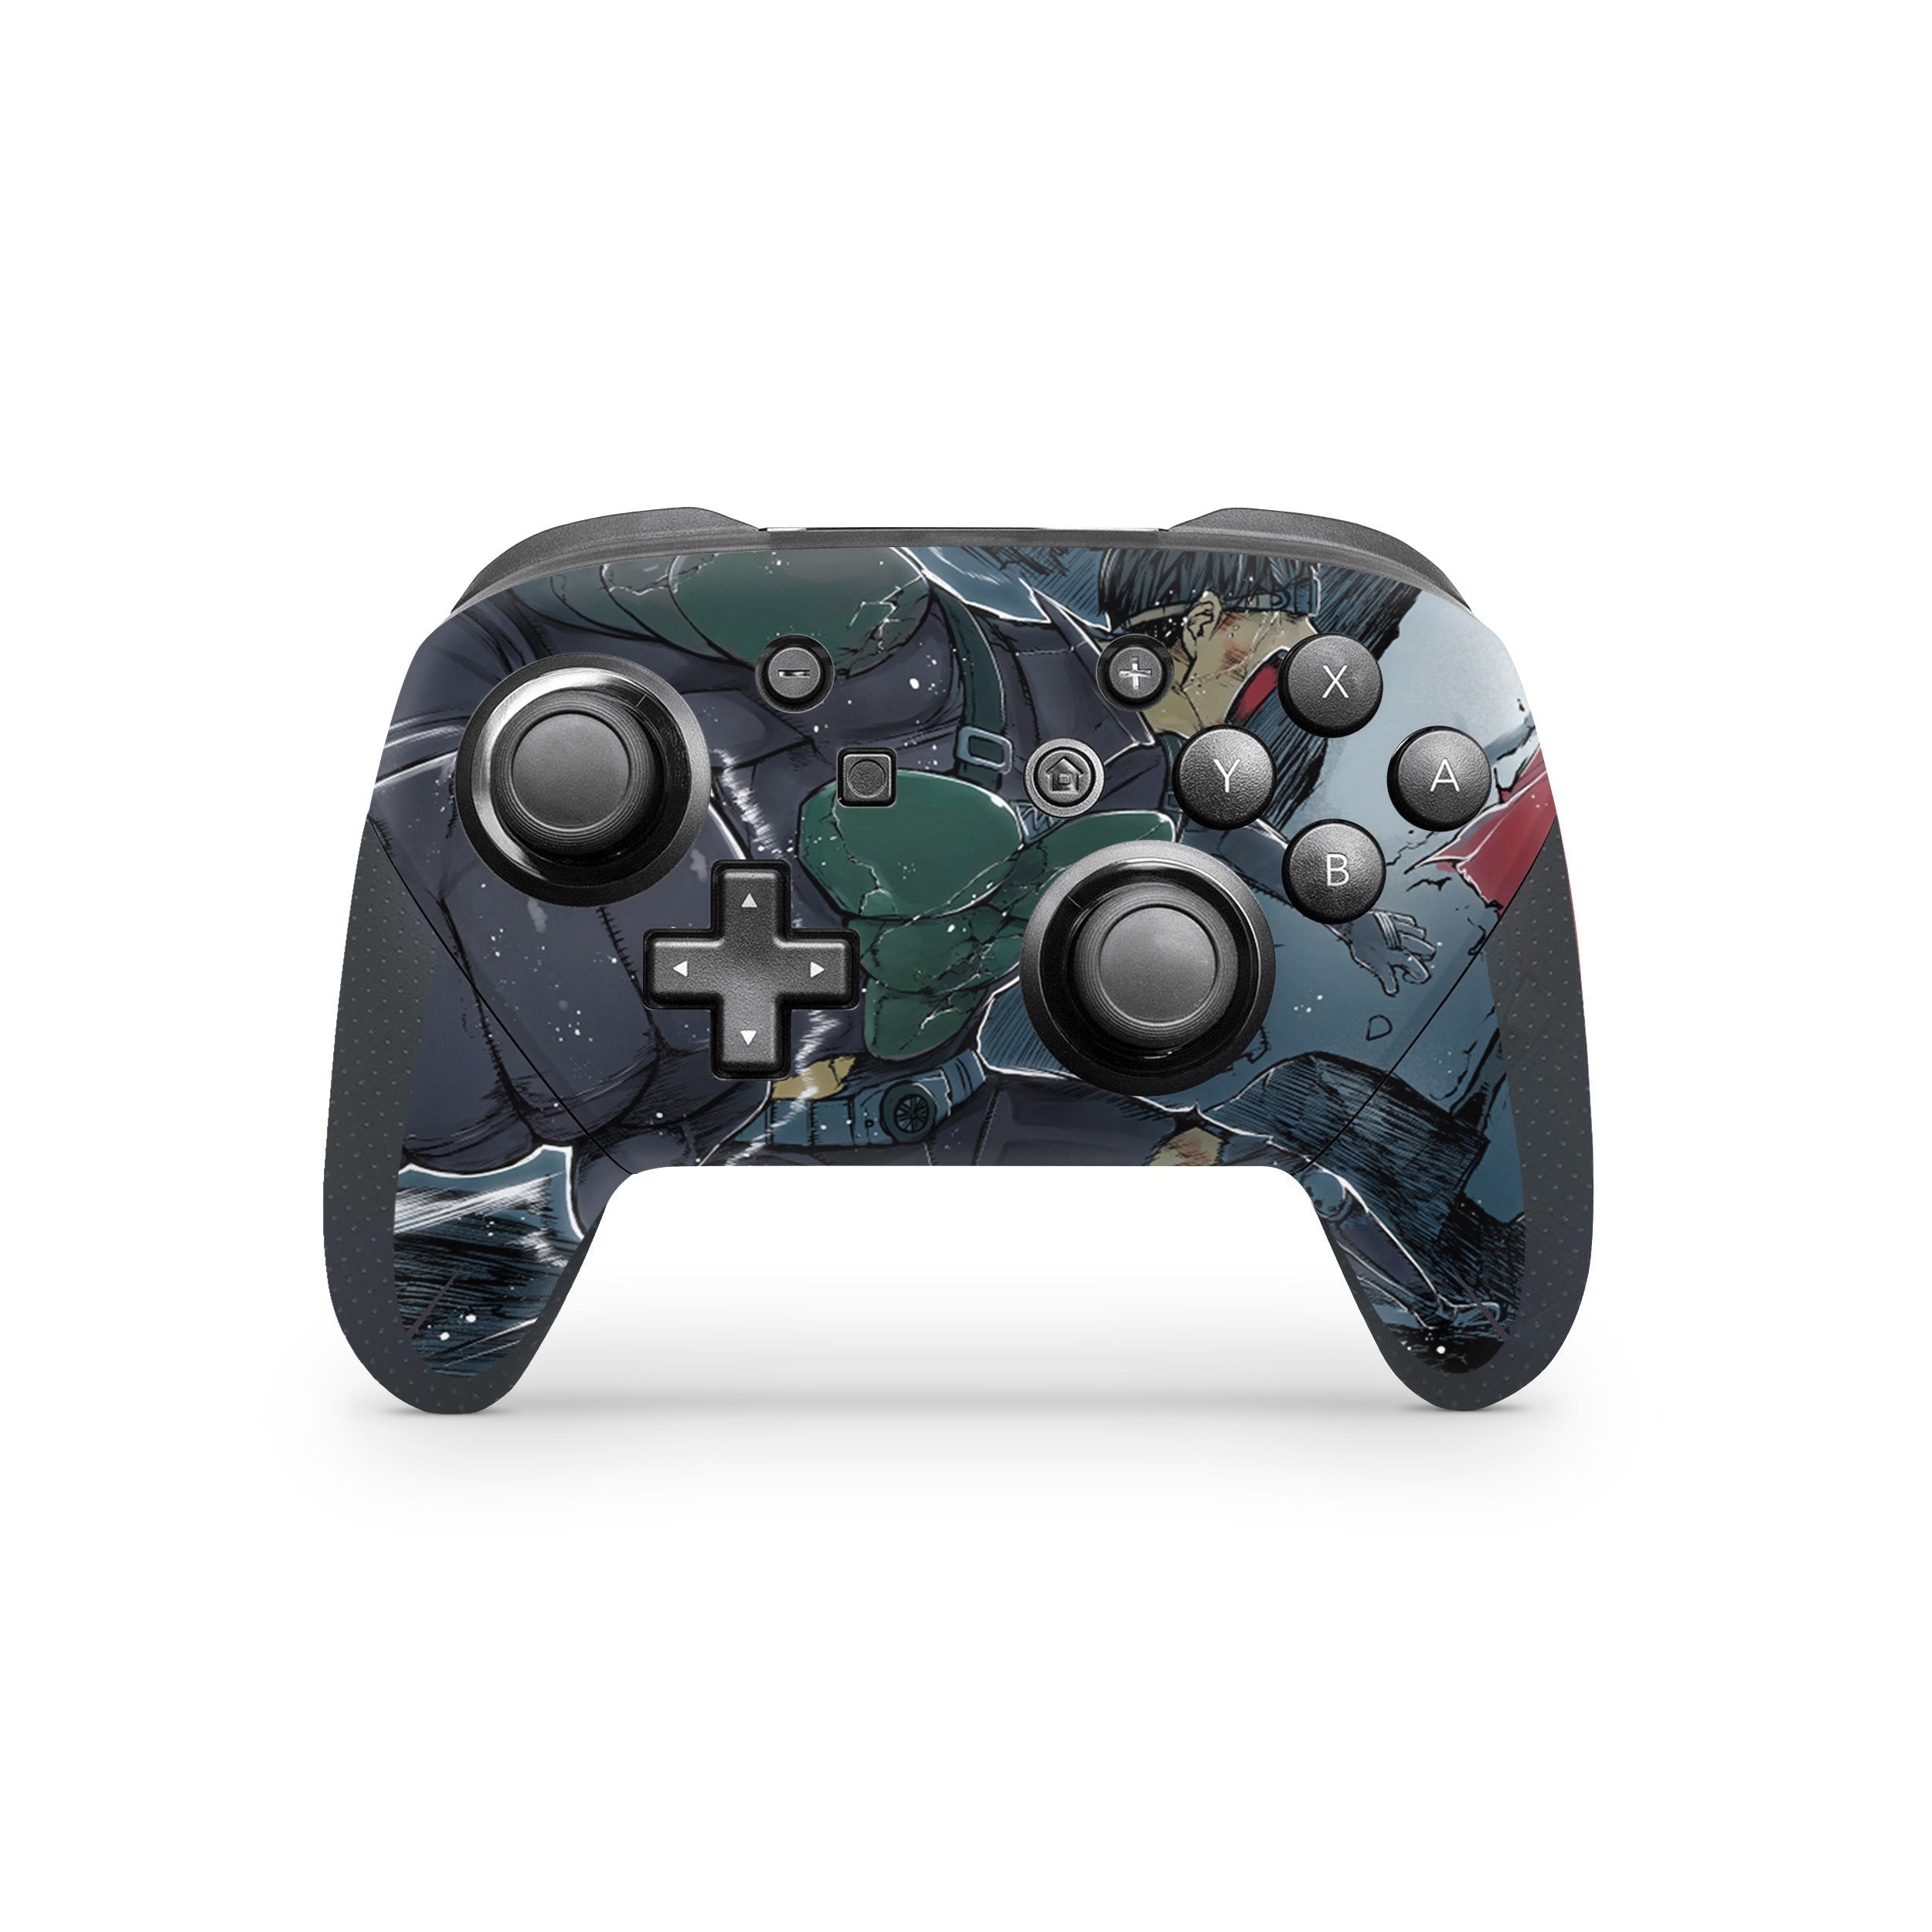 A video game skin featuring a One Piece Zoro Roronoa design for the Switch Pro Controller.